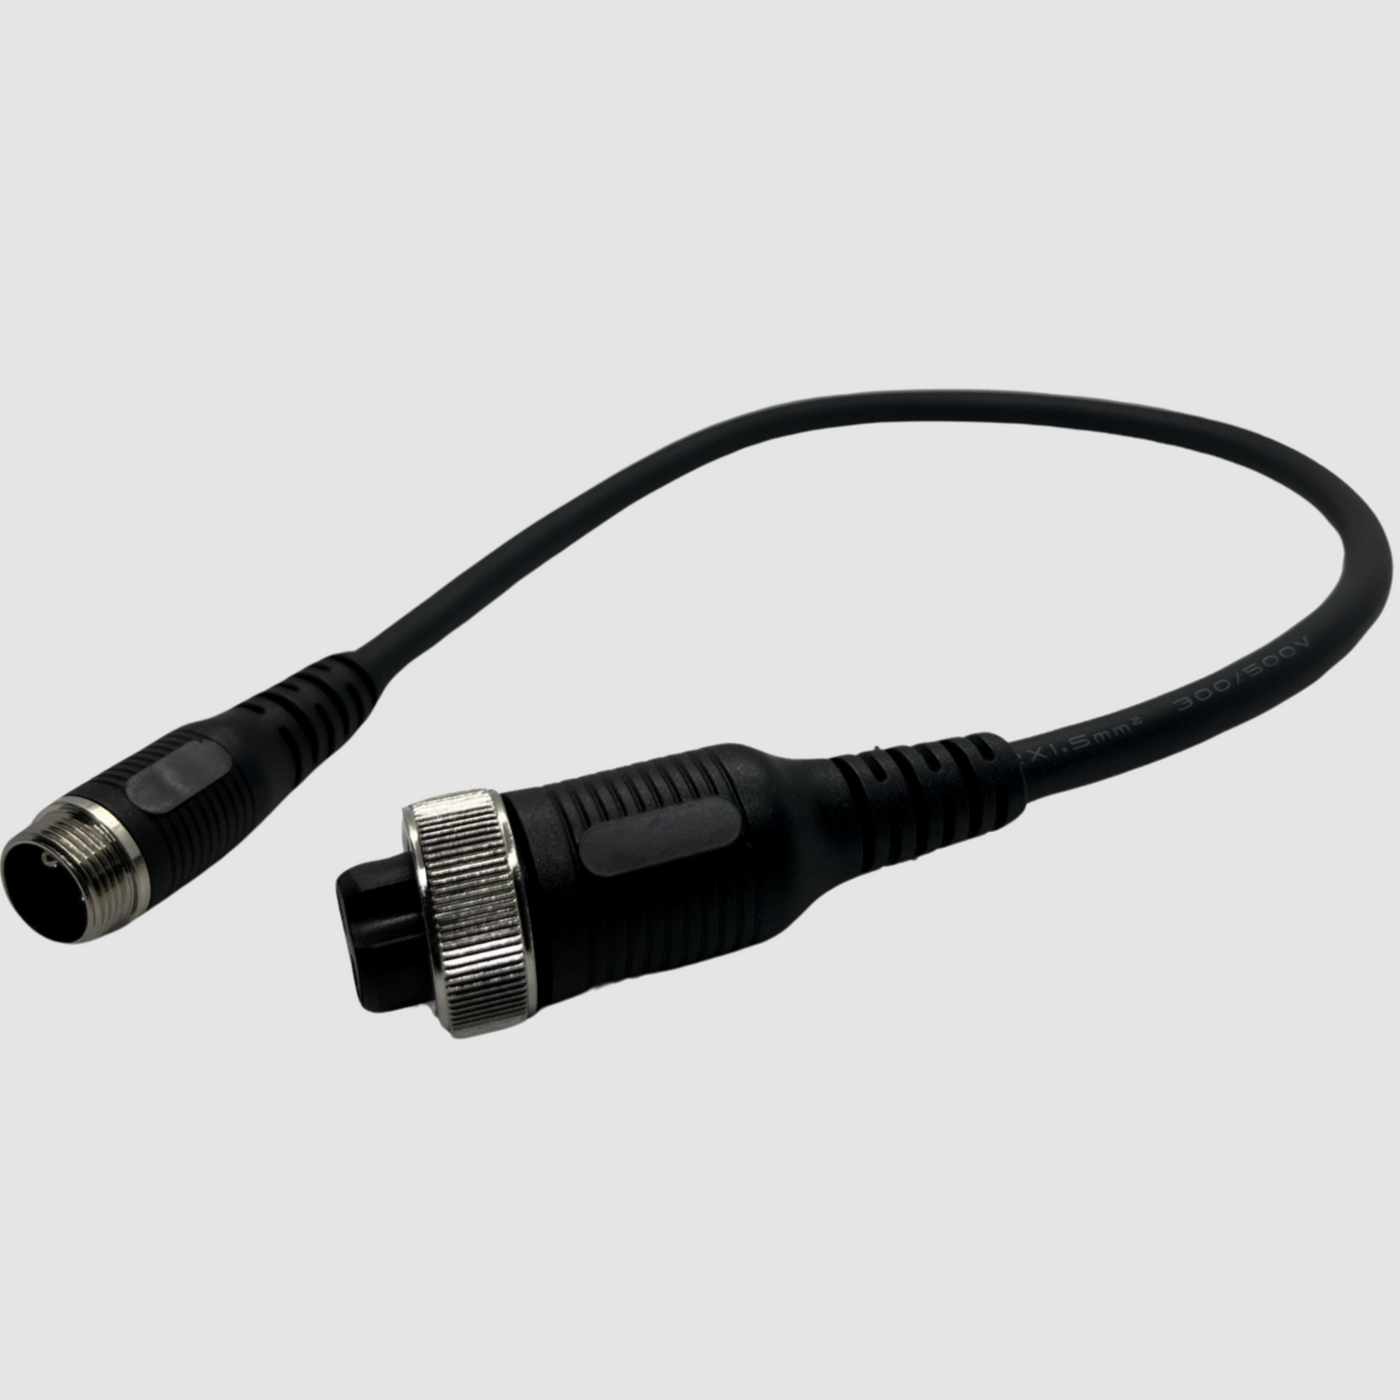 Standard Seaborg 800-1200 MJ MP3000 Adapter Cable